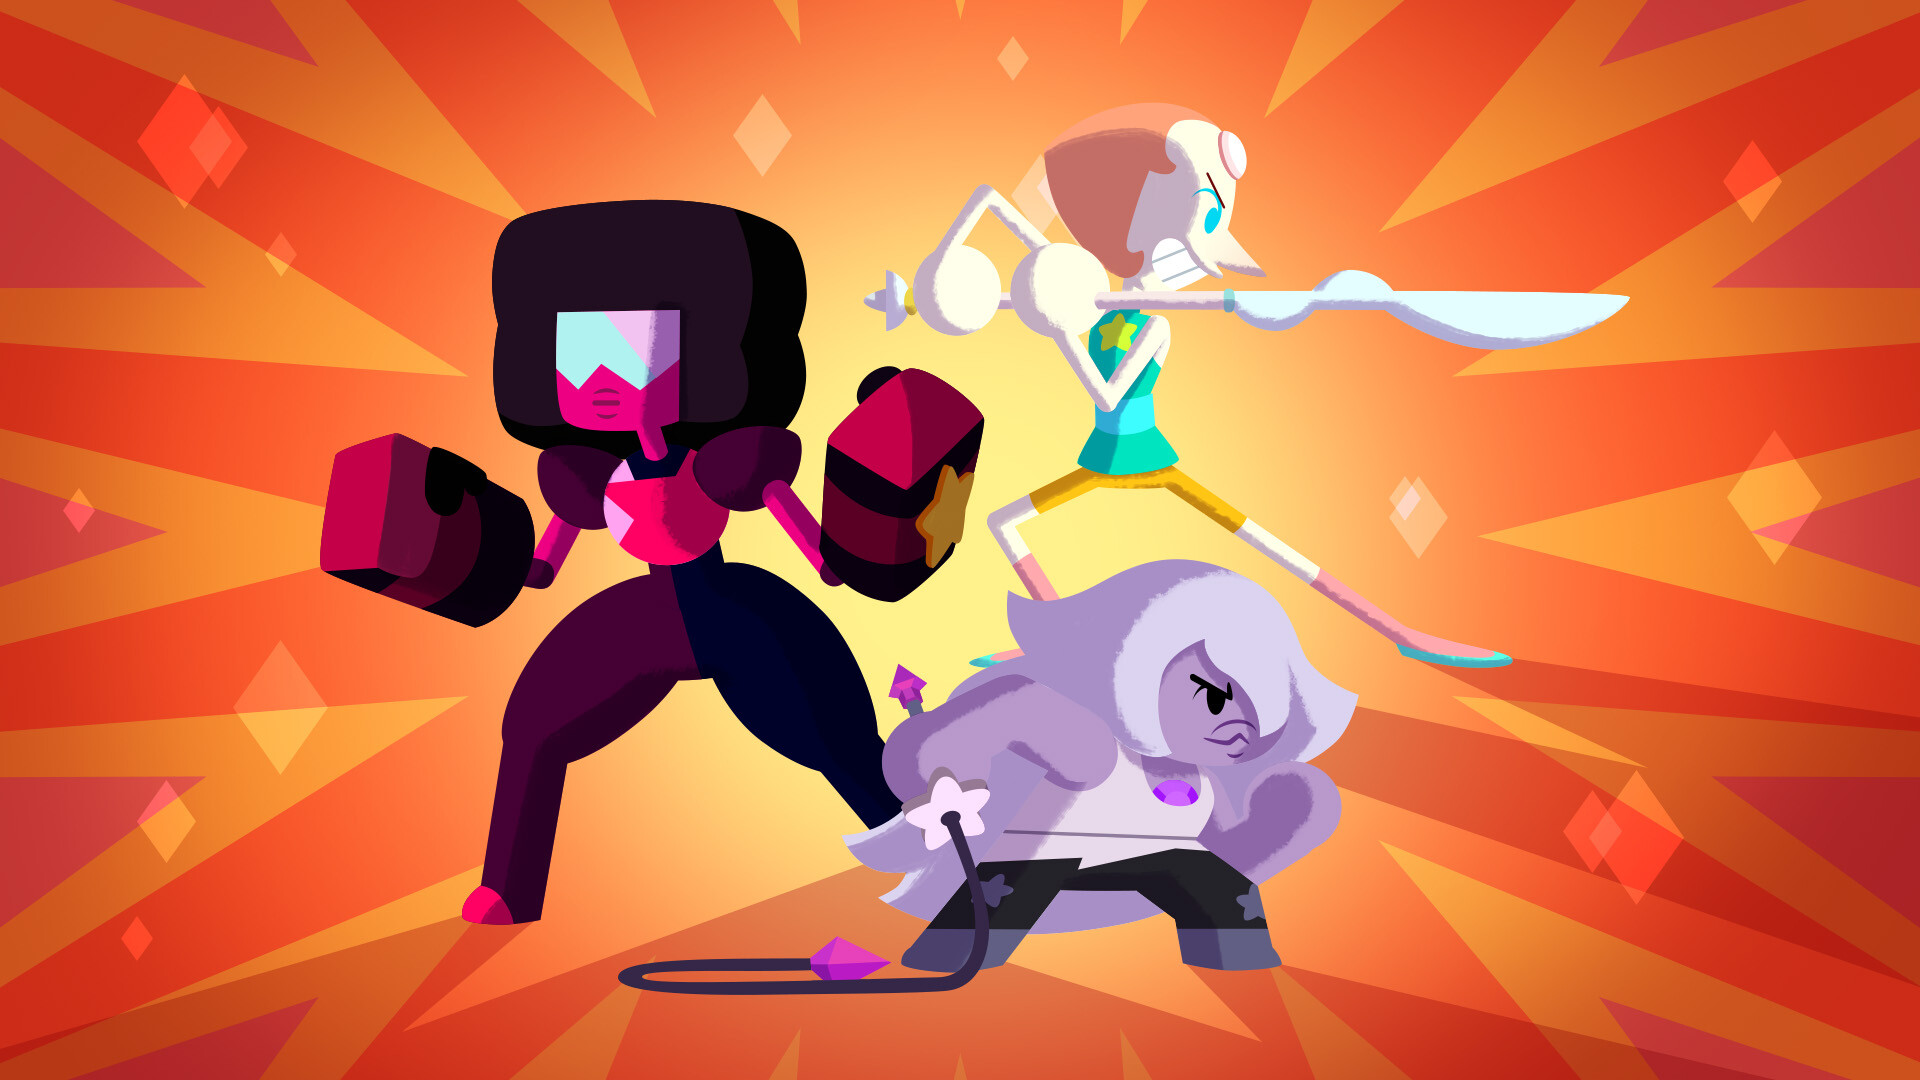 Garnet (Steven Universe): The Crystal Gems, The leader with Amethyst and Pearl, Humanity and the Earth protectors. 1920x1080 Full HD Wallpaper.